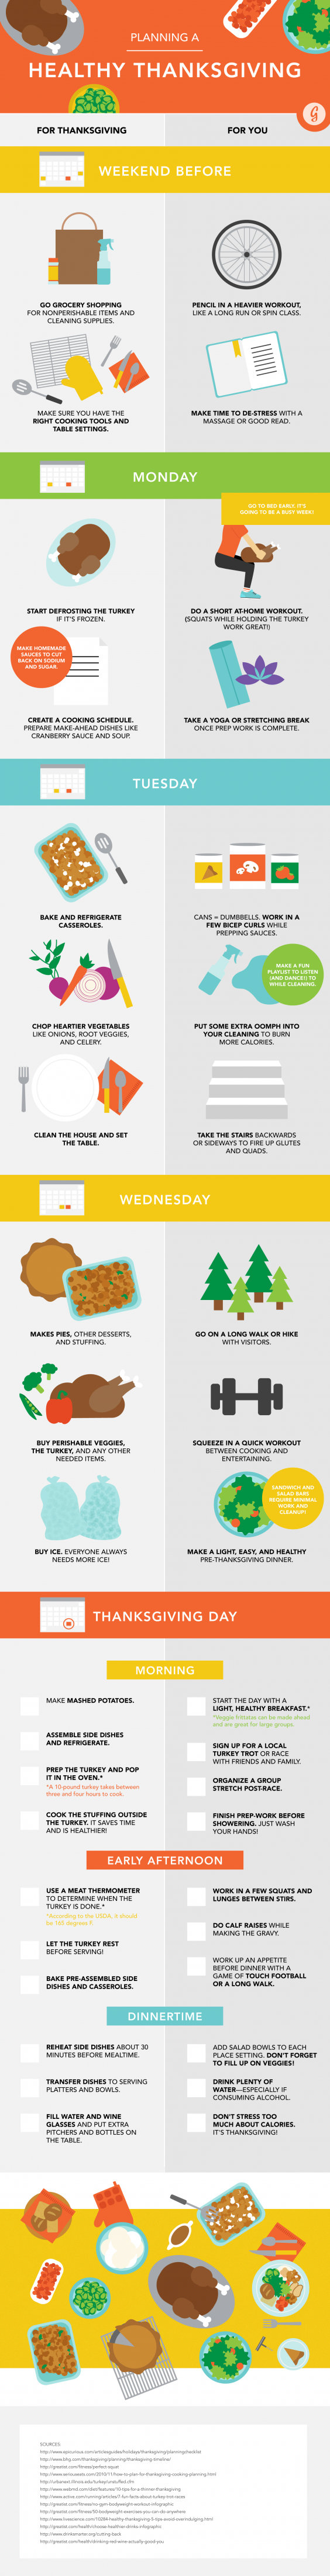 The Ultimate Illustrated Guide to Planning a Healthy Thanksgiving